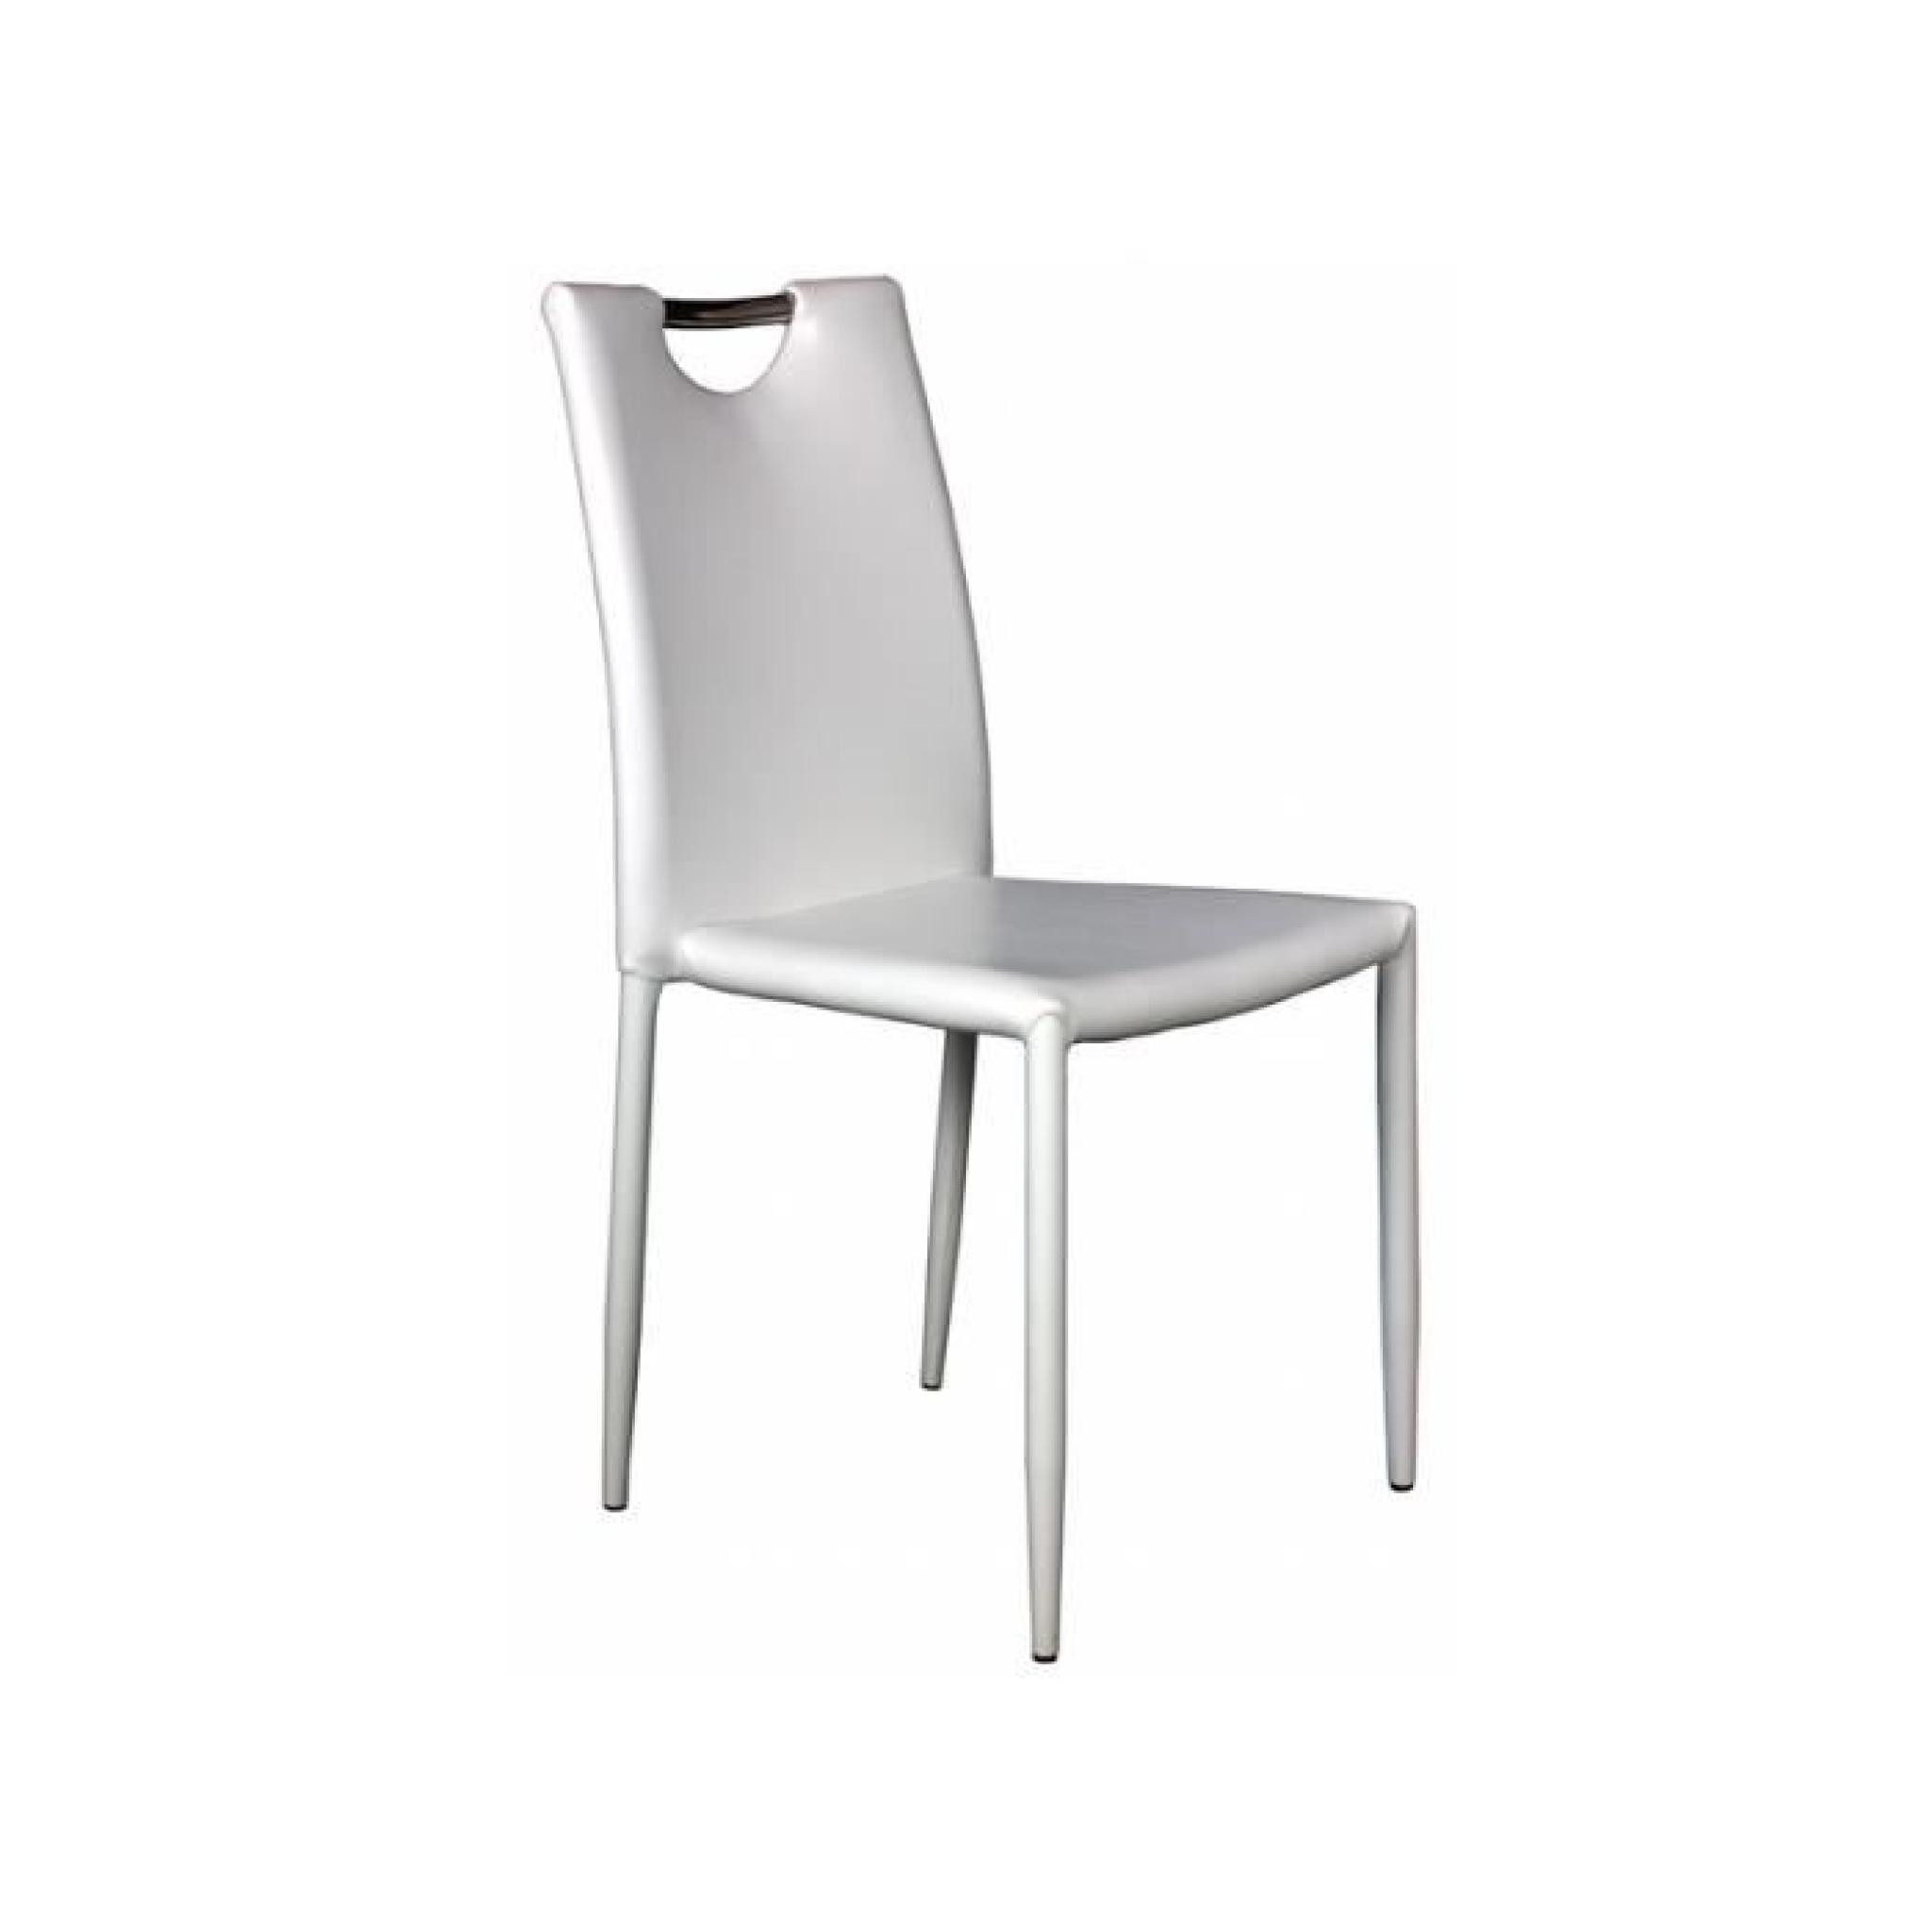 Kira - Lot 6 Chaises Blanches pas cher